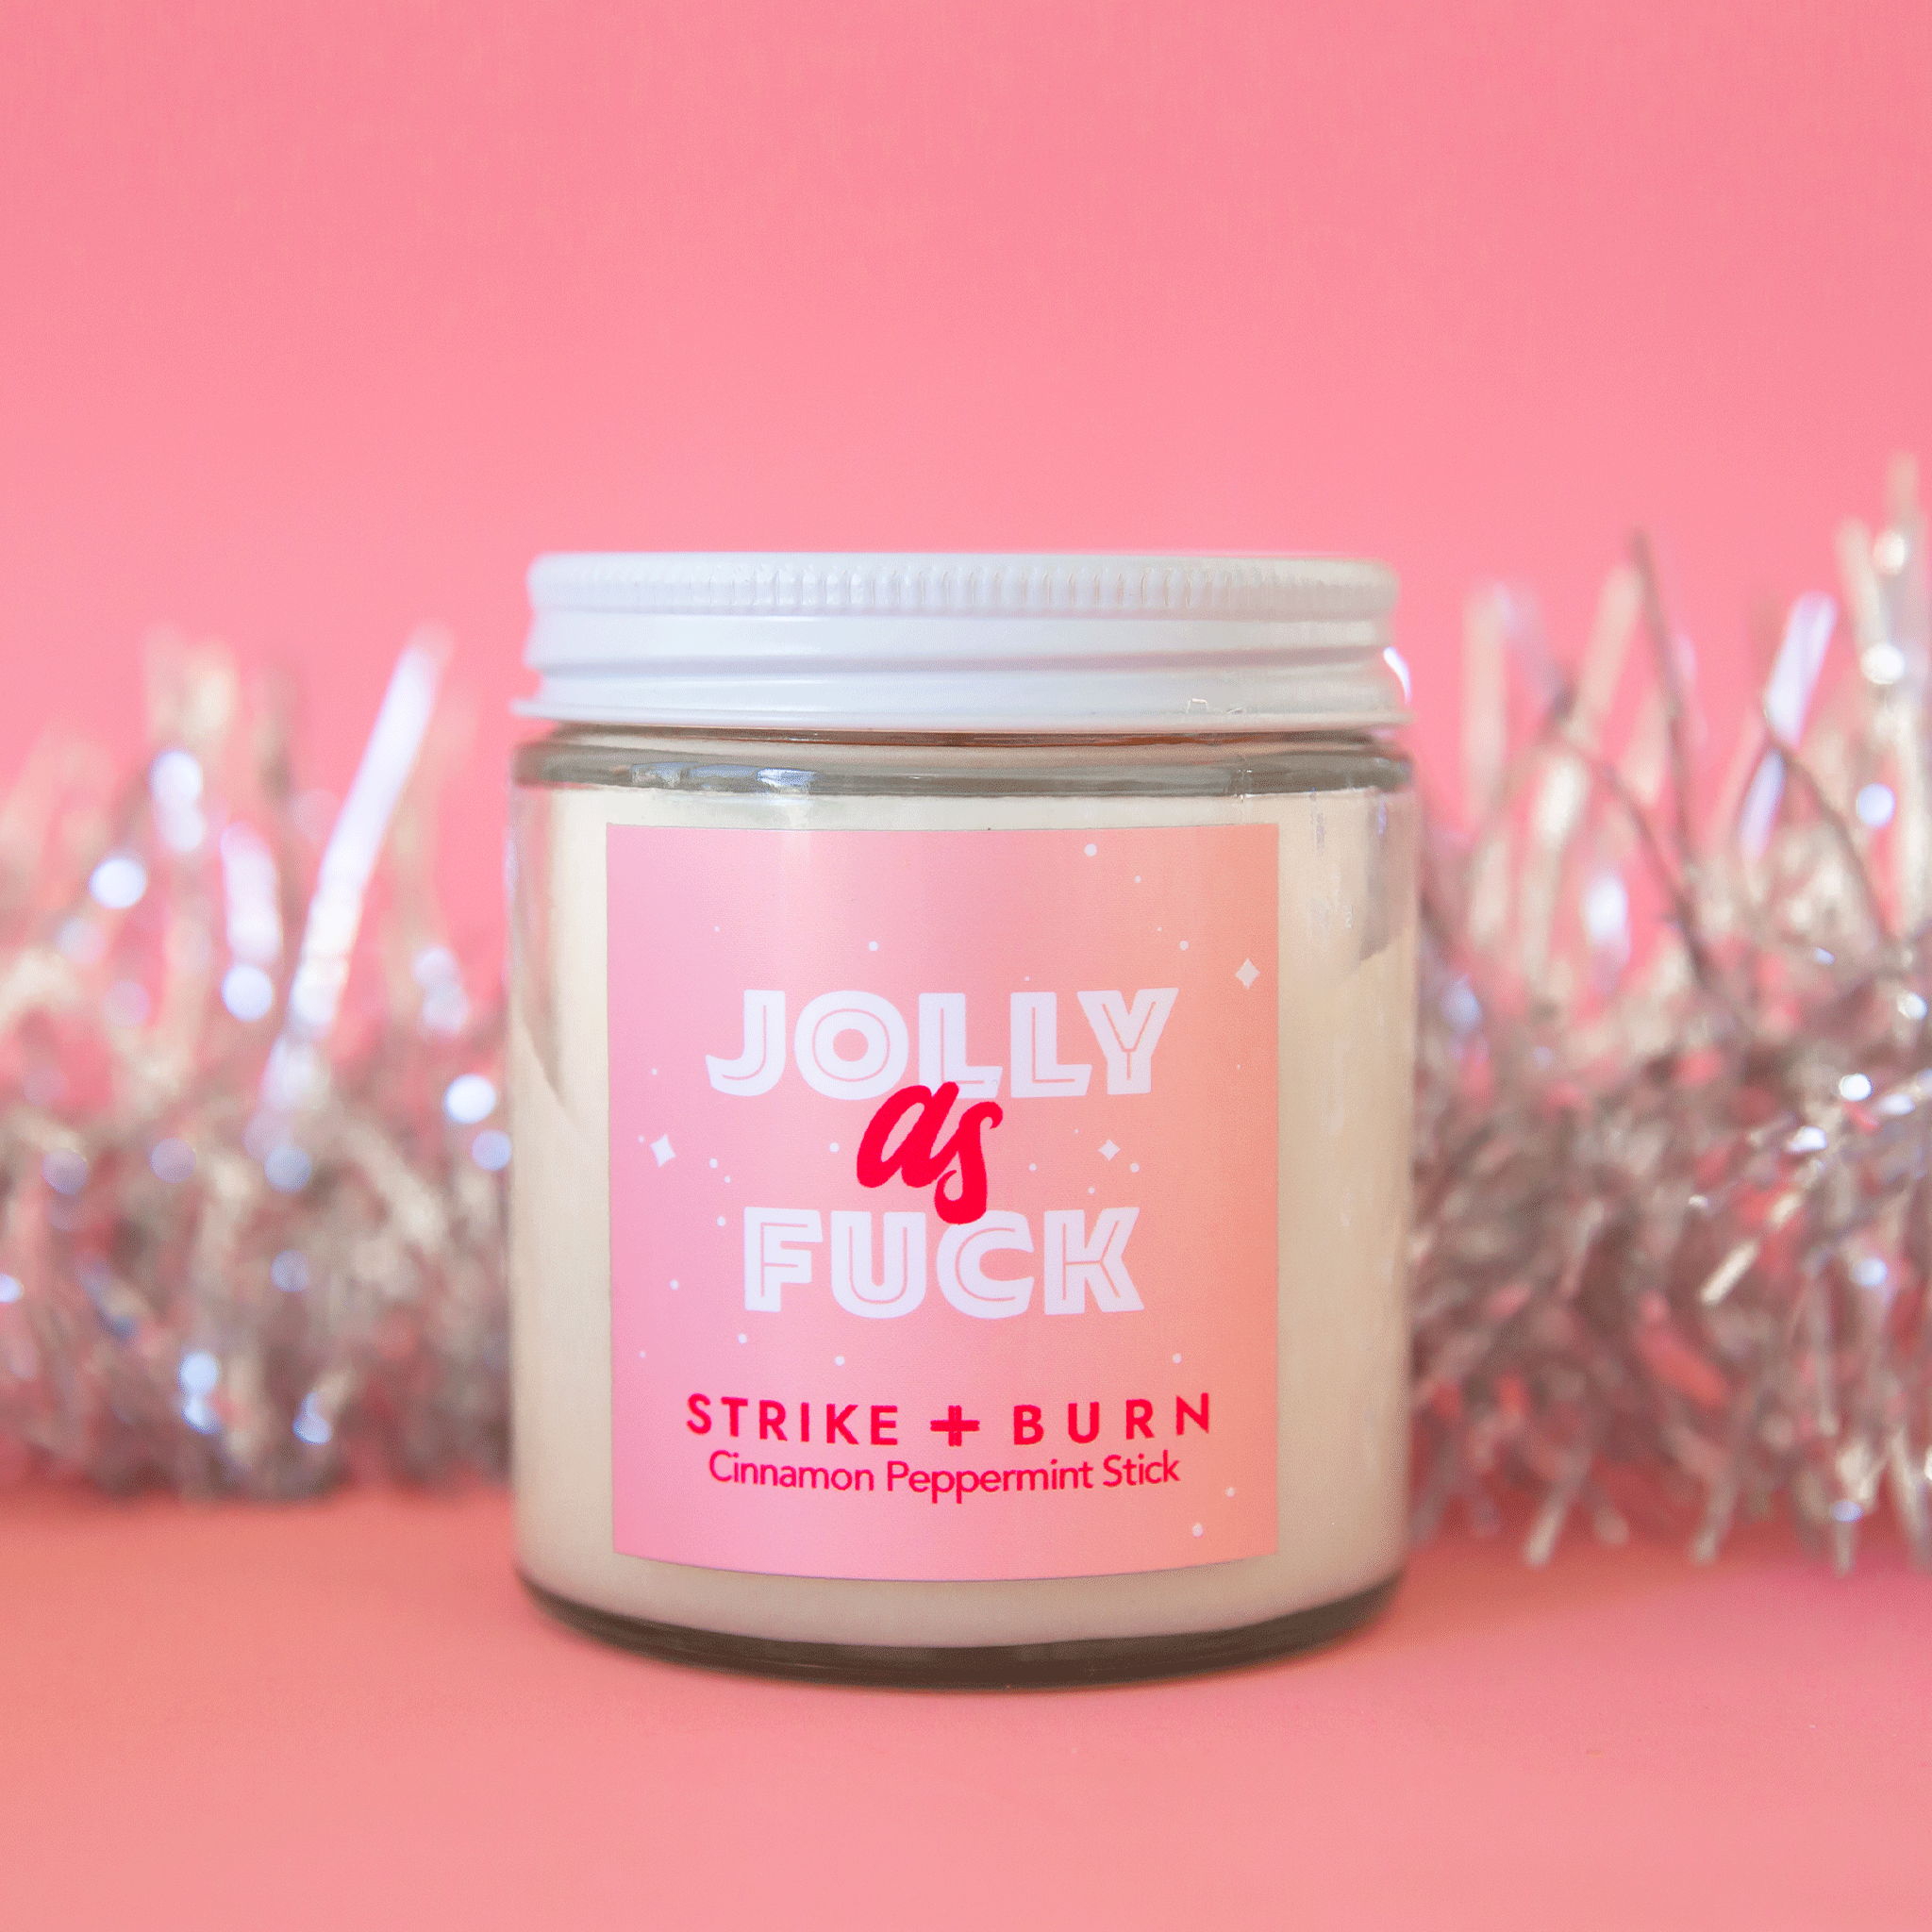 A glass jar candle with a pink label that reads, "Jolly as Fuck" in white and hot pink font along with a white graphic of a Christmas ornament on the right side of the label.